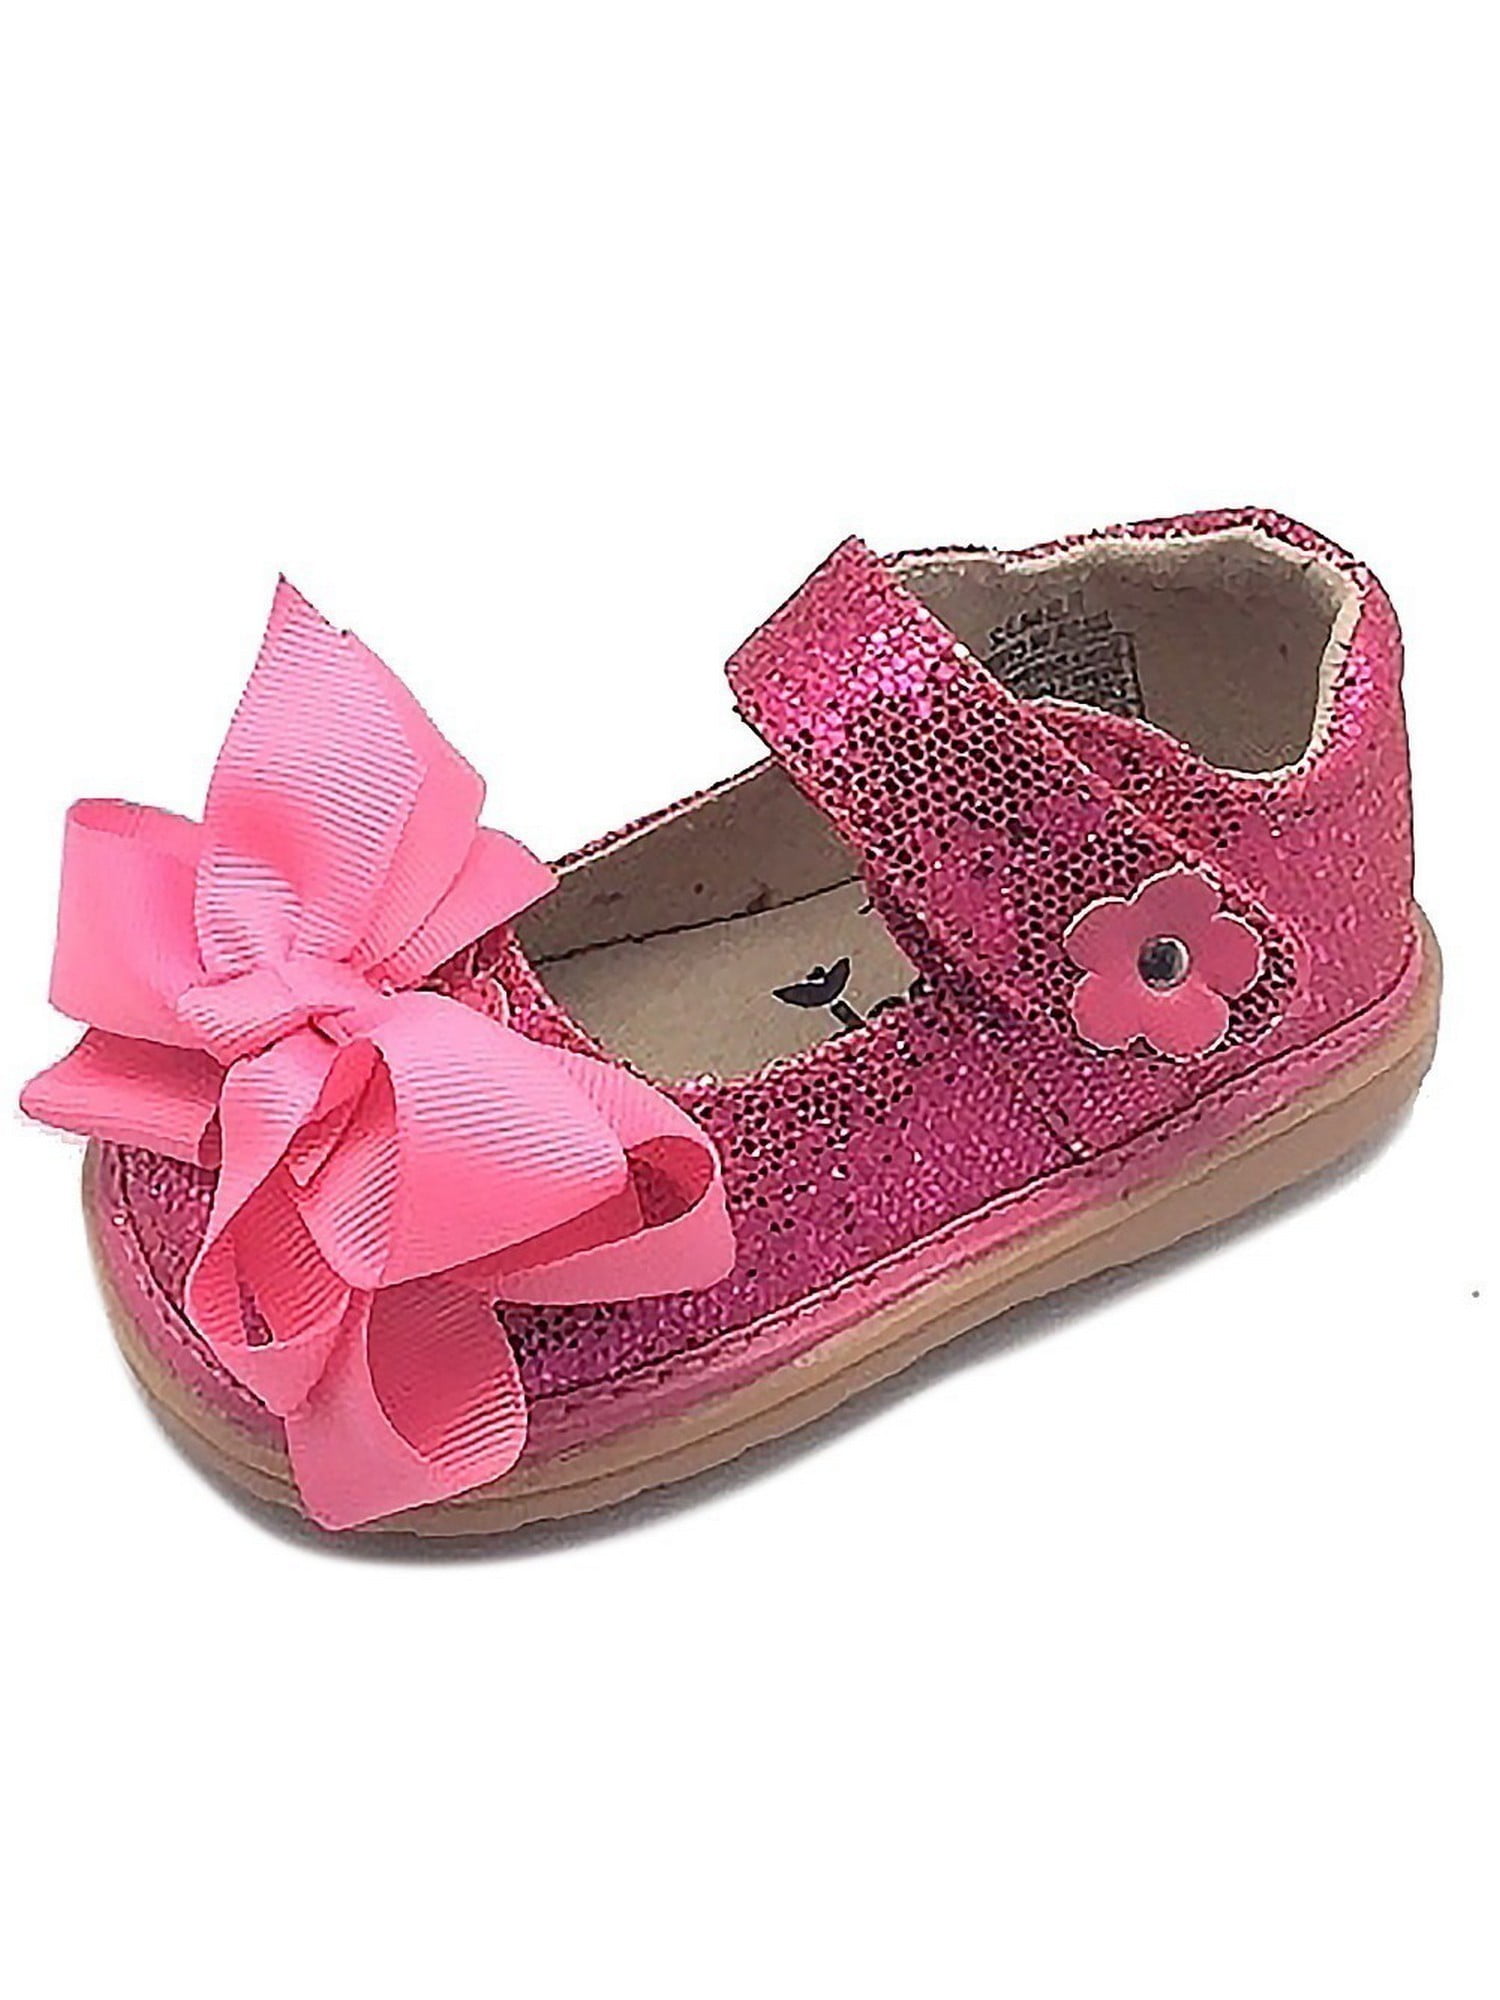 hot pink mary janes